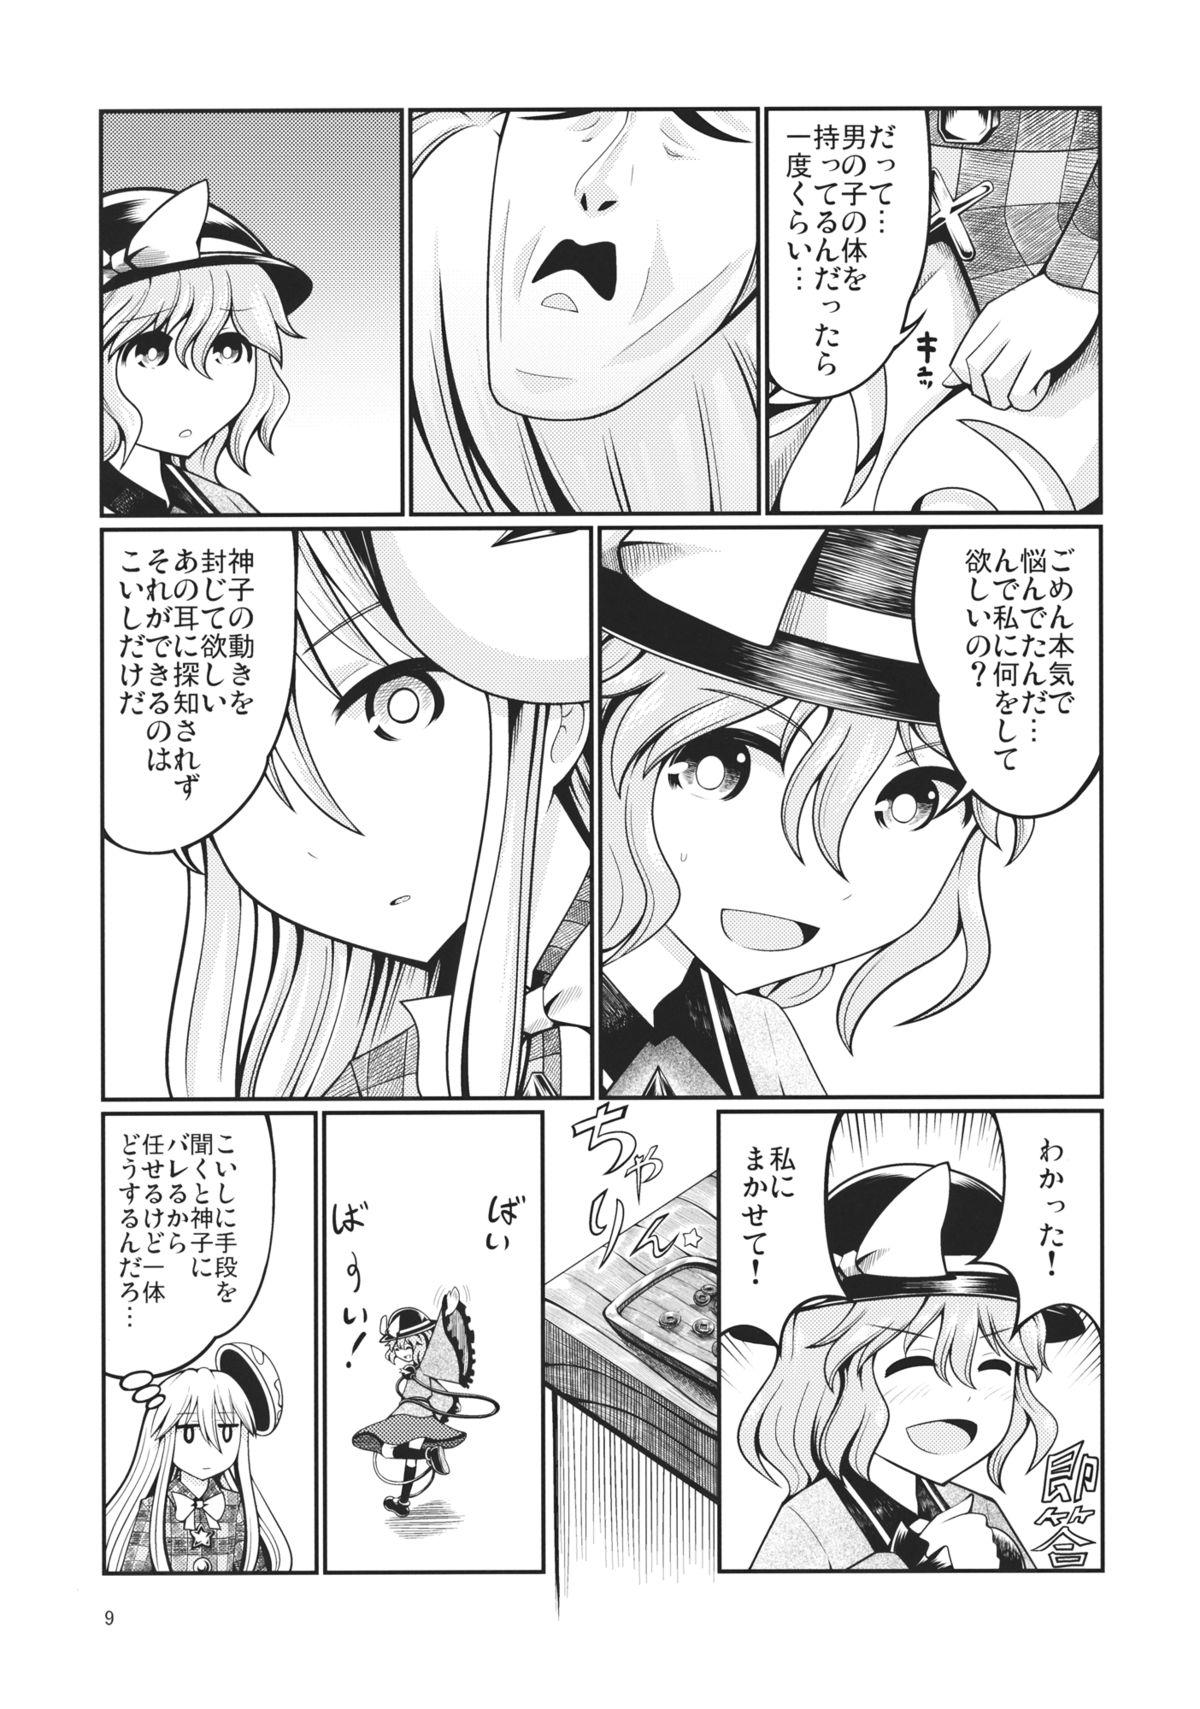 Rola Reverse Sexuality 3 - Touhou project Free Teenage Porn - Page 8